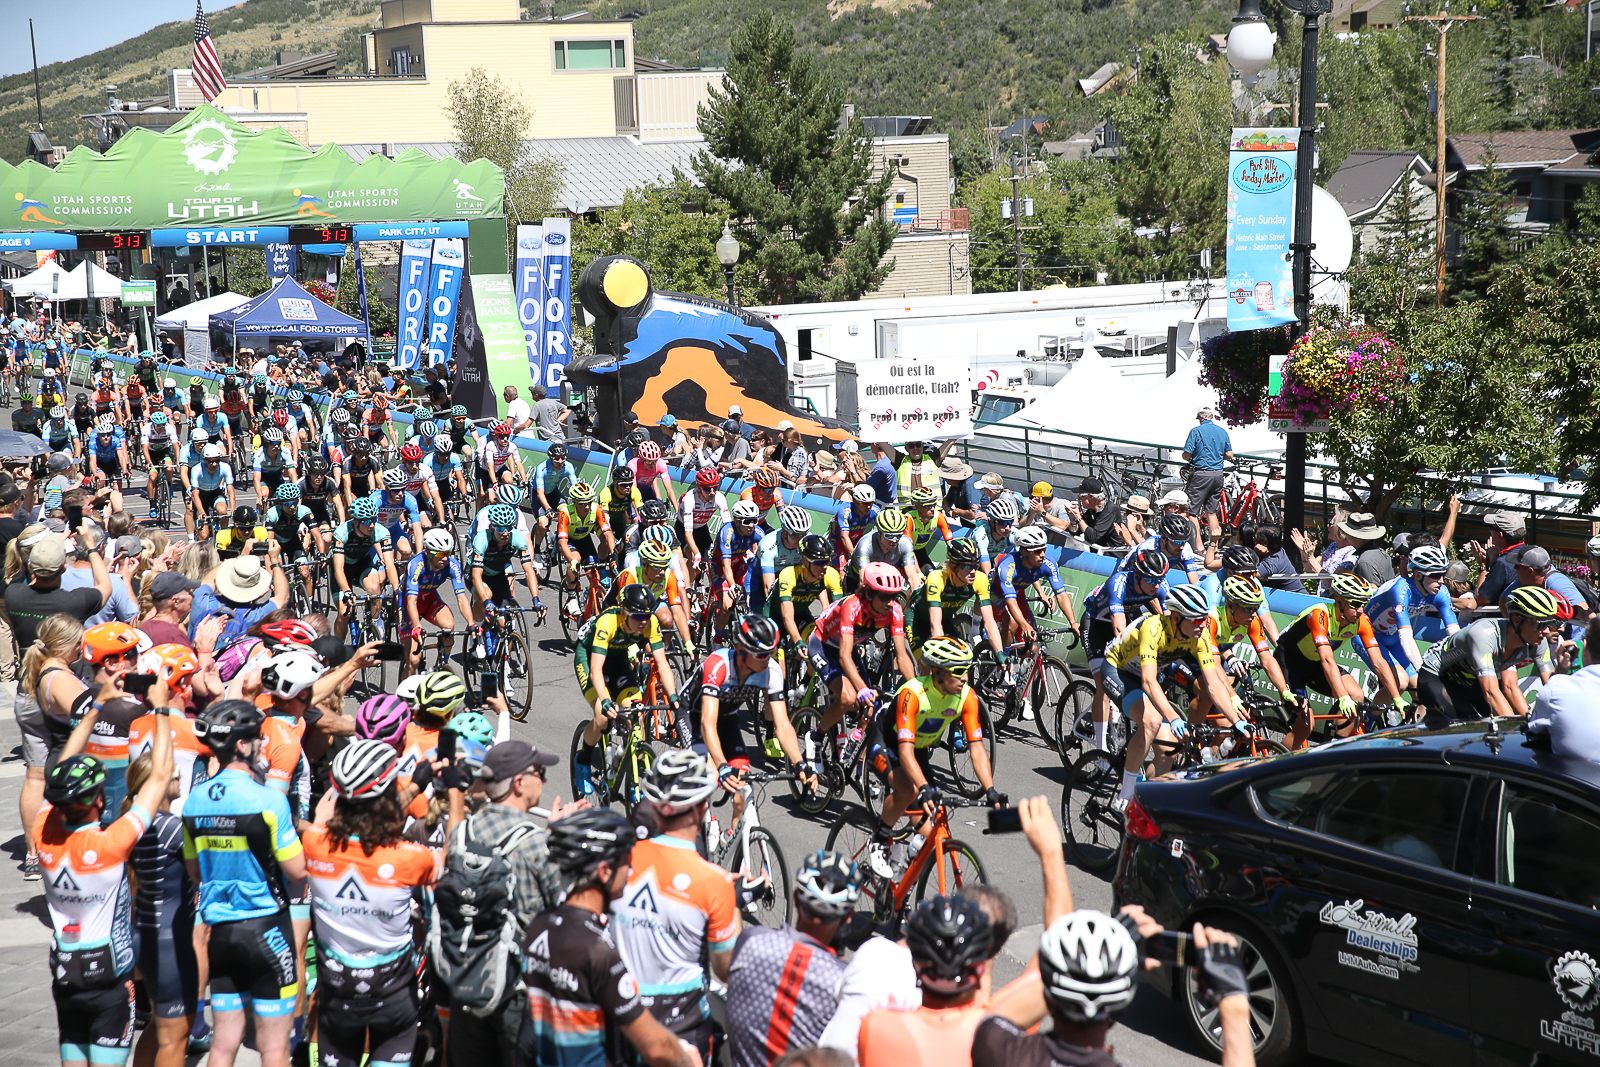 Fans of cycling an cyclists themselves rode out to watch the neutral parade laps at the start of Stage 6 in Park City.